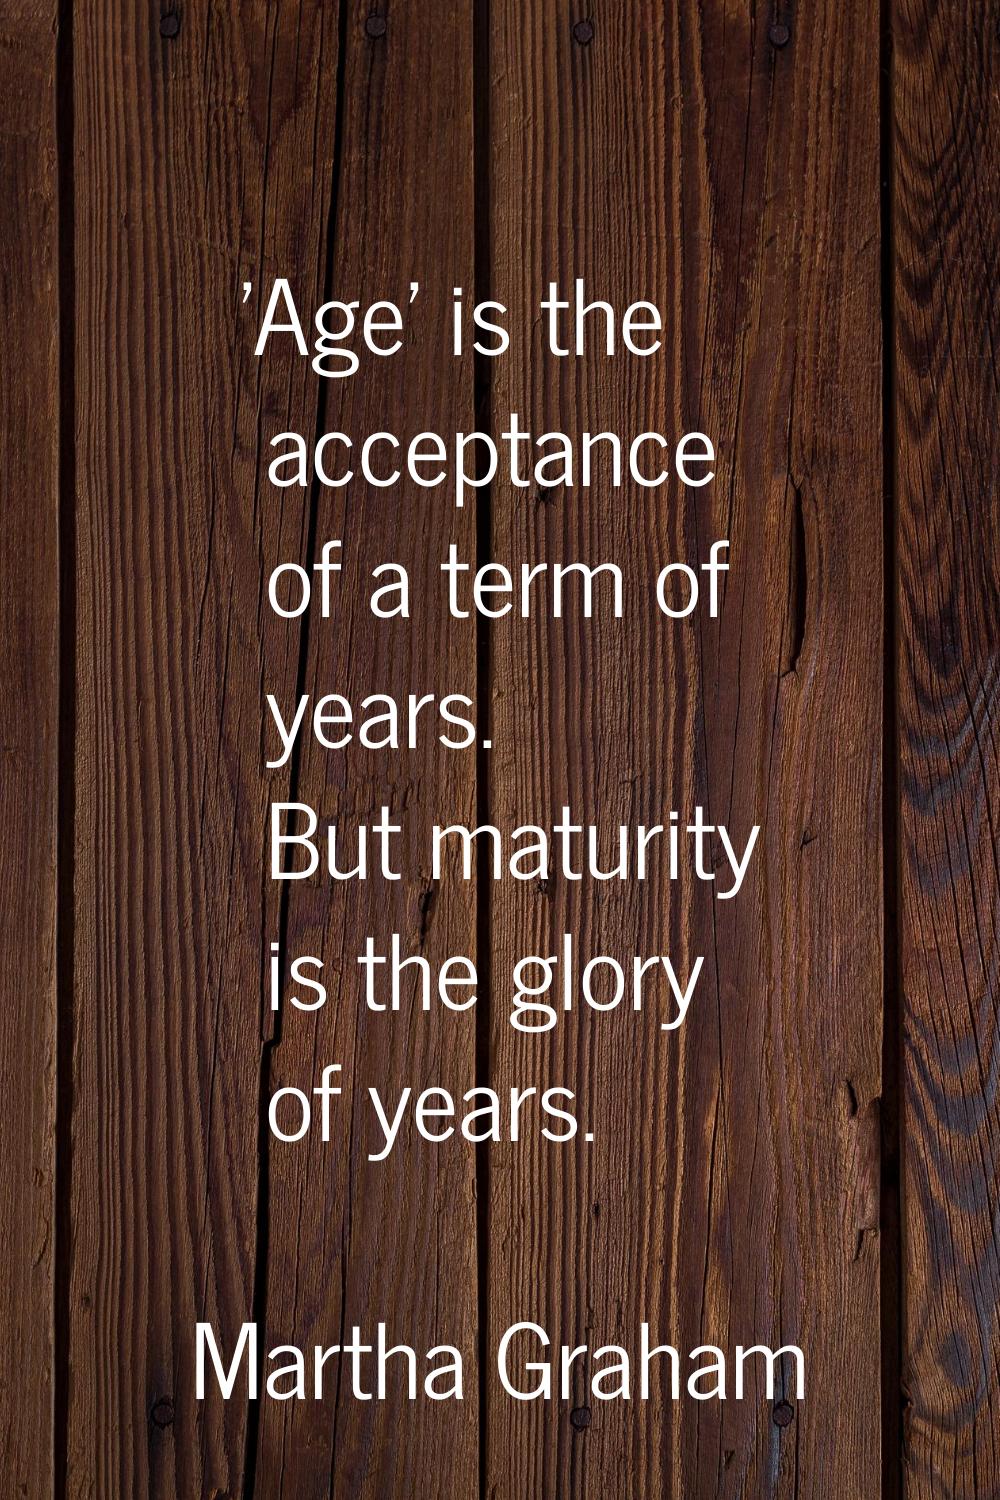 'Age' is the acceptance of a term of years. But maturity is the glory of years.